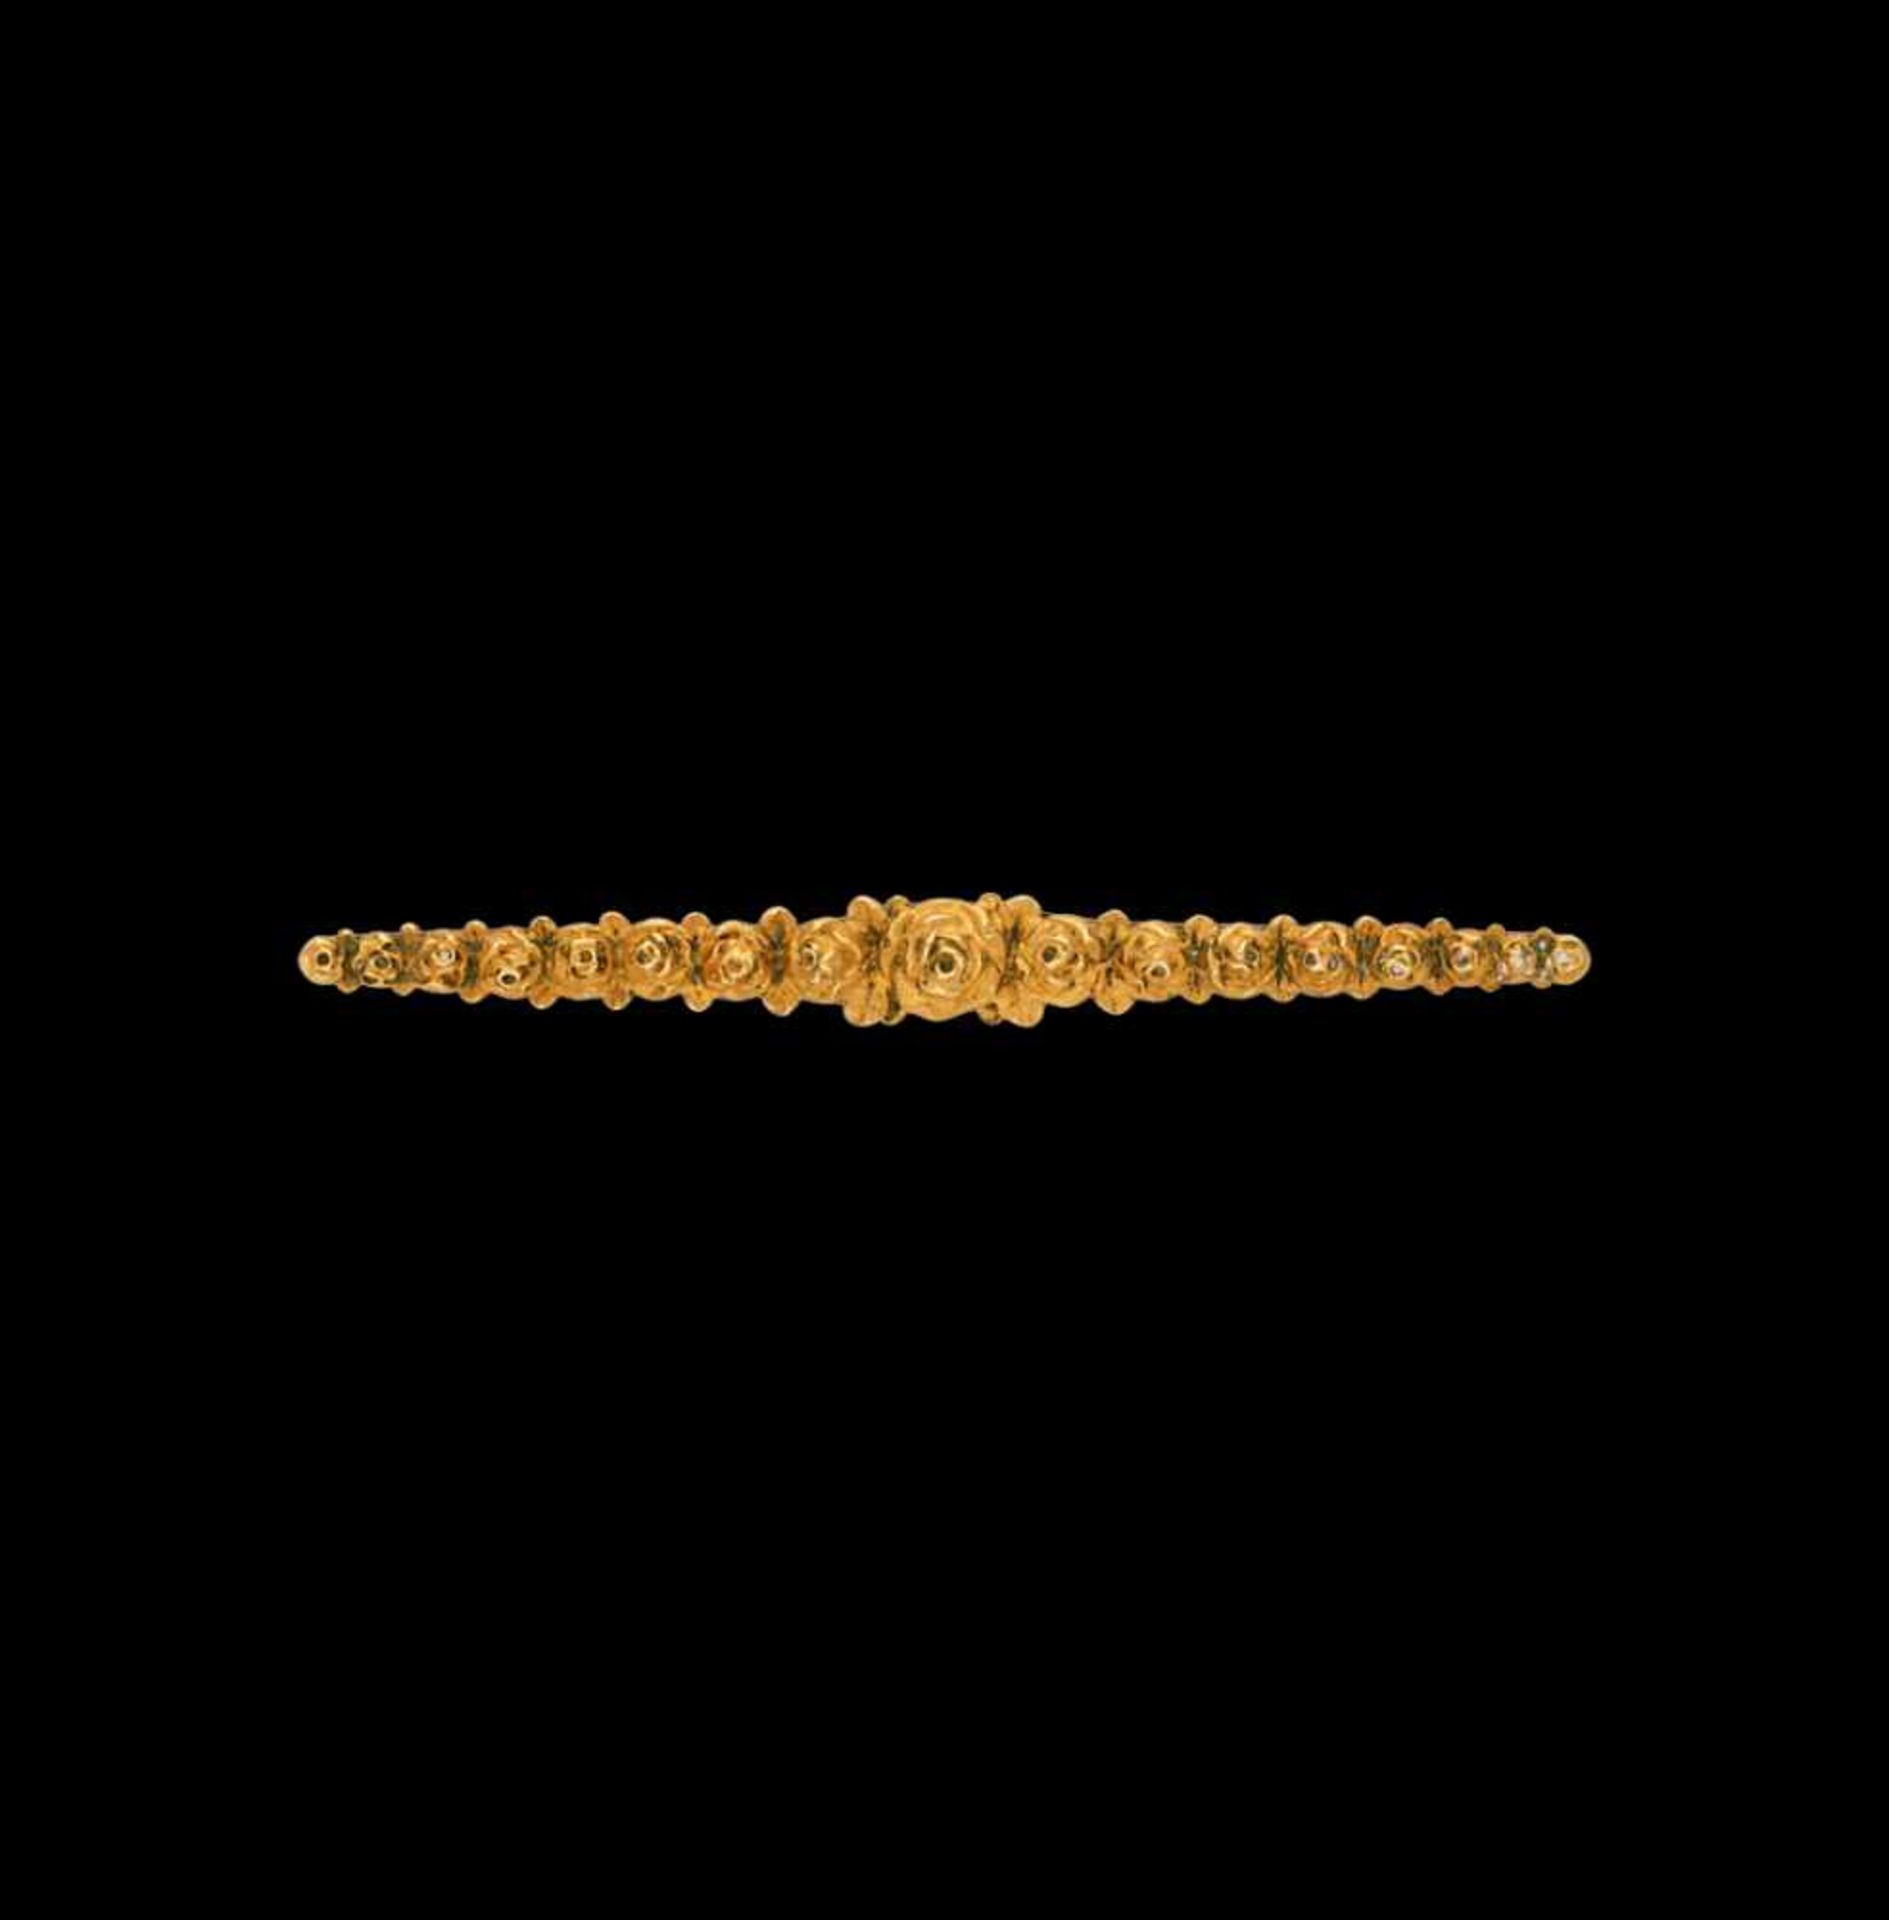 Noucentist brooch in gold, circa 1930.Gold. Hallmarked. 1x9.9 cm. 14.6 gr. It includes a tie